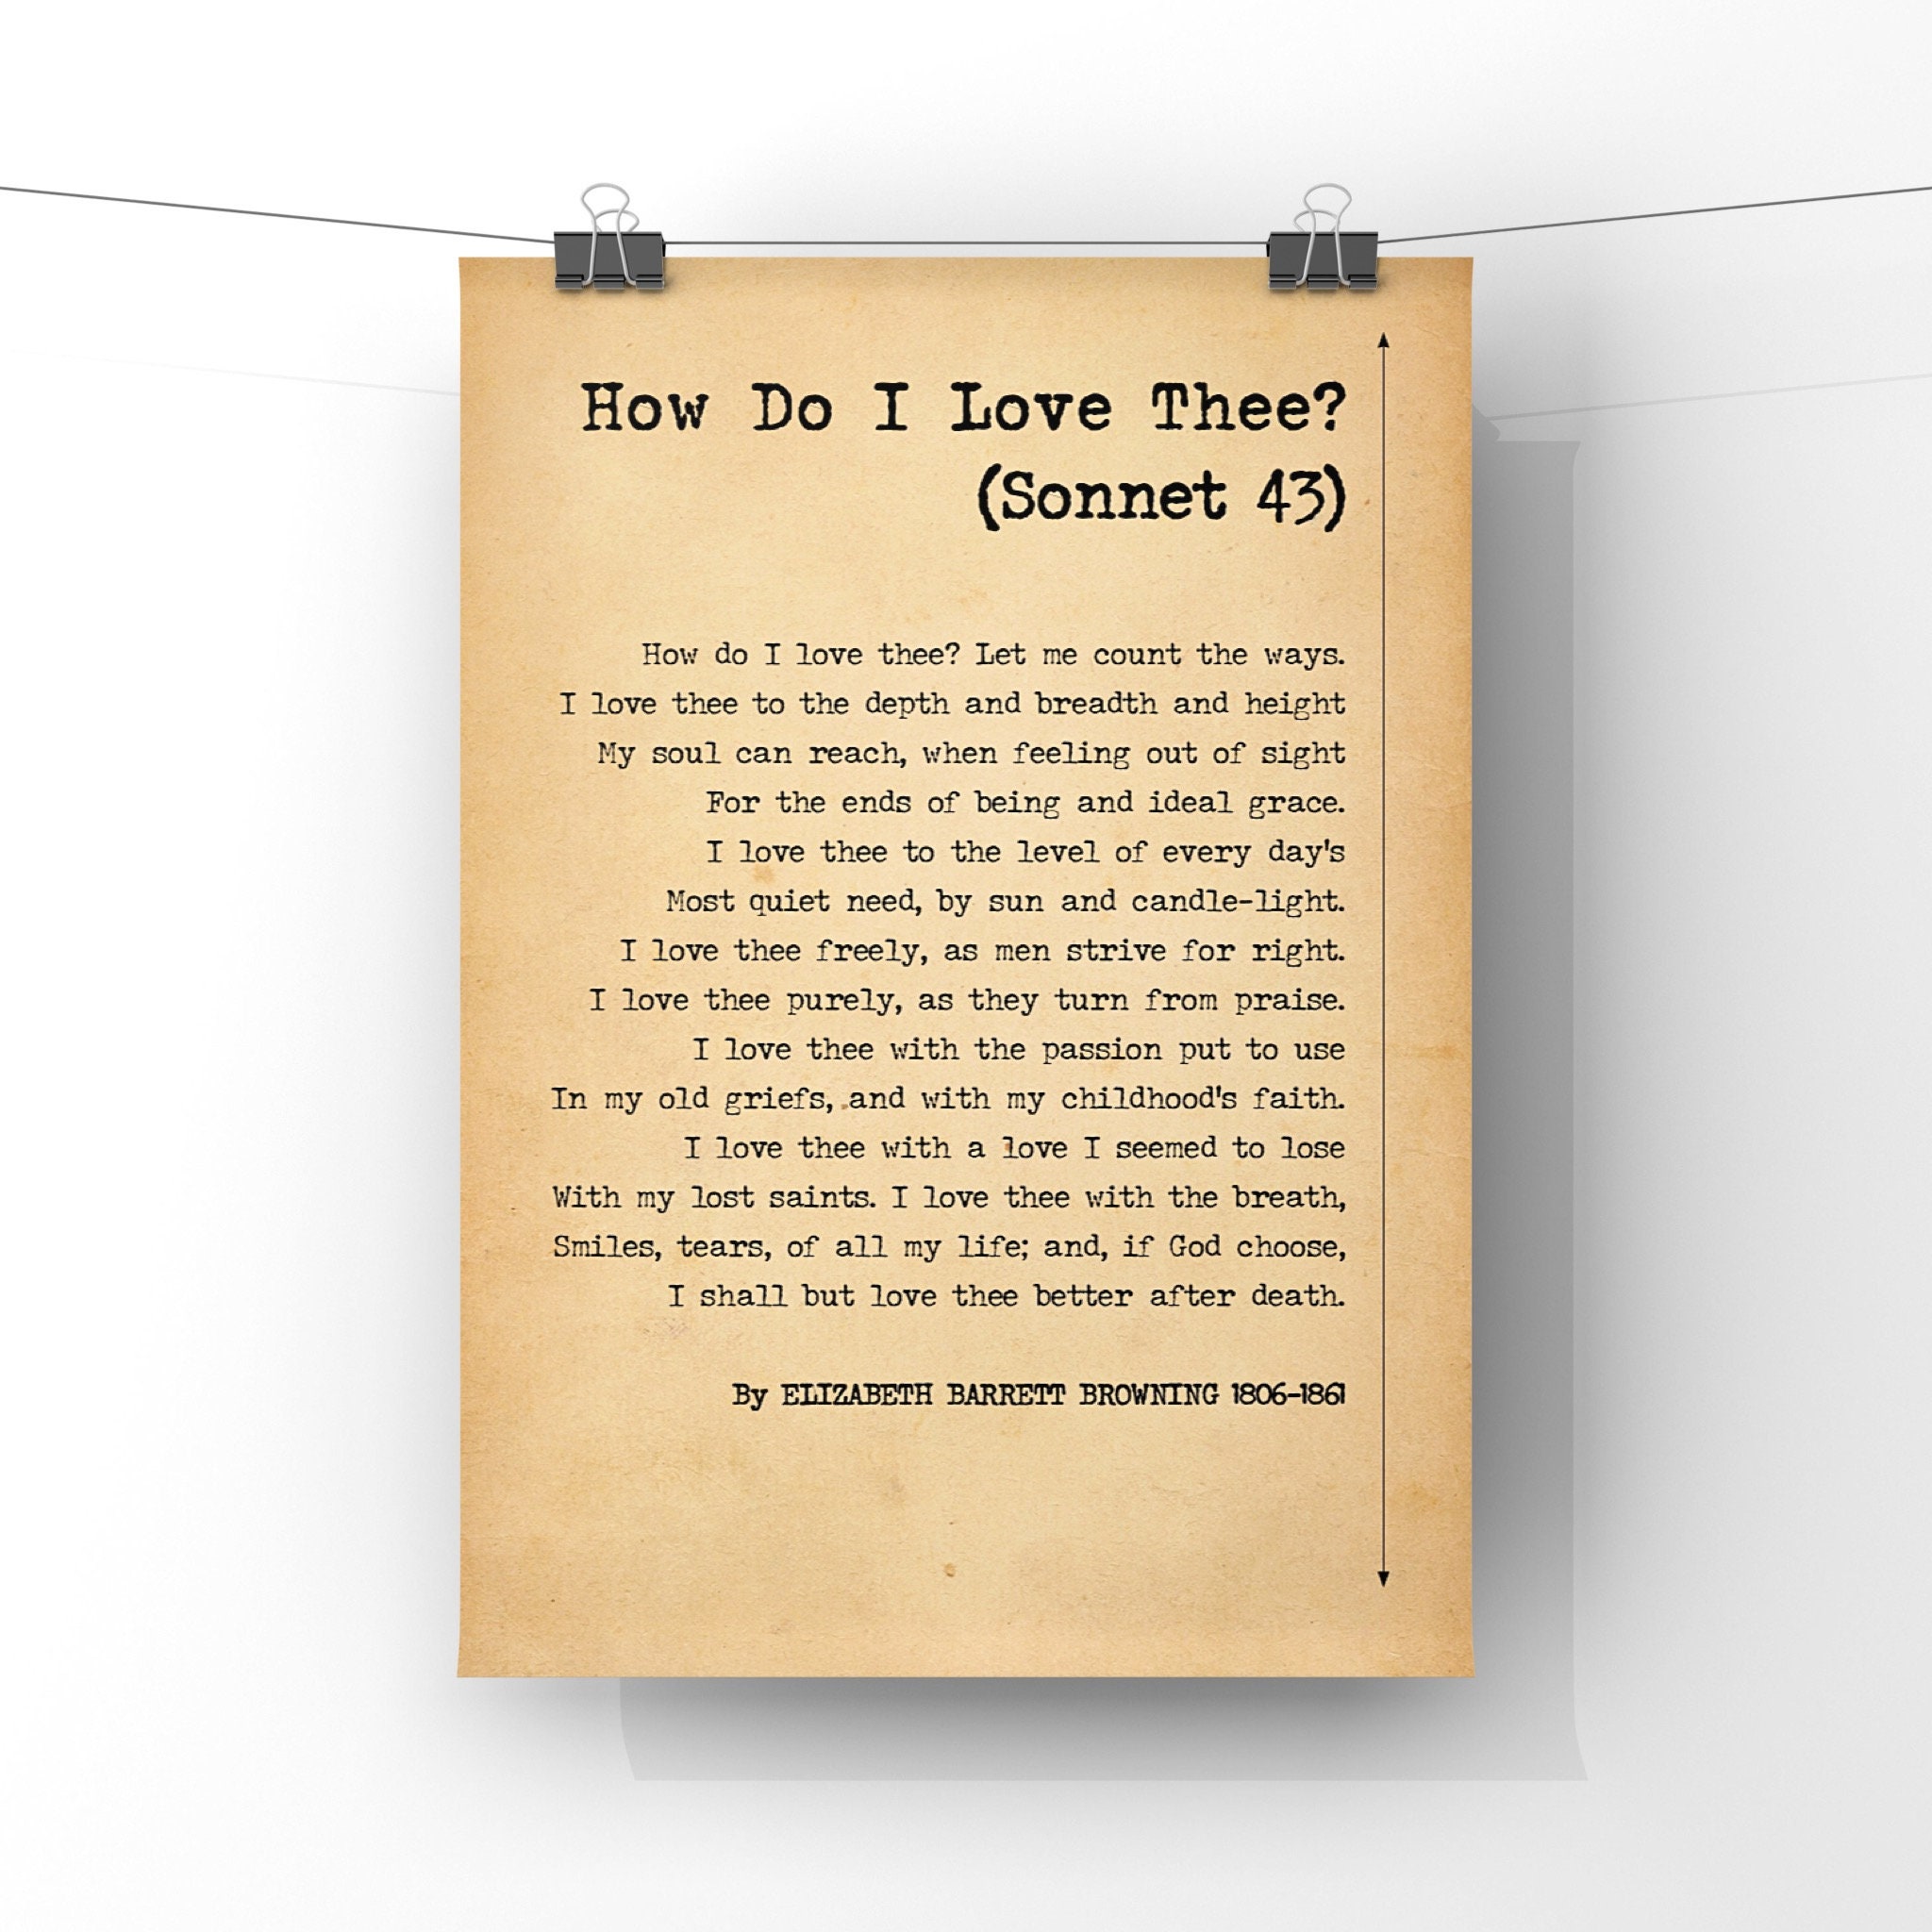 How Do I Love Thee Sonnet 43 by Elizabeth Barrett Browning - Etsy